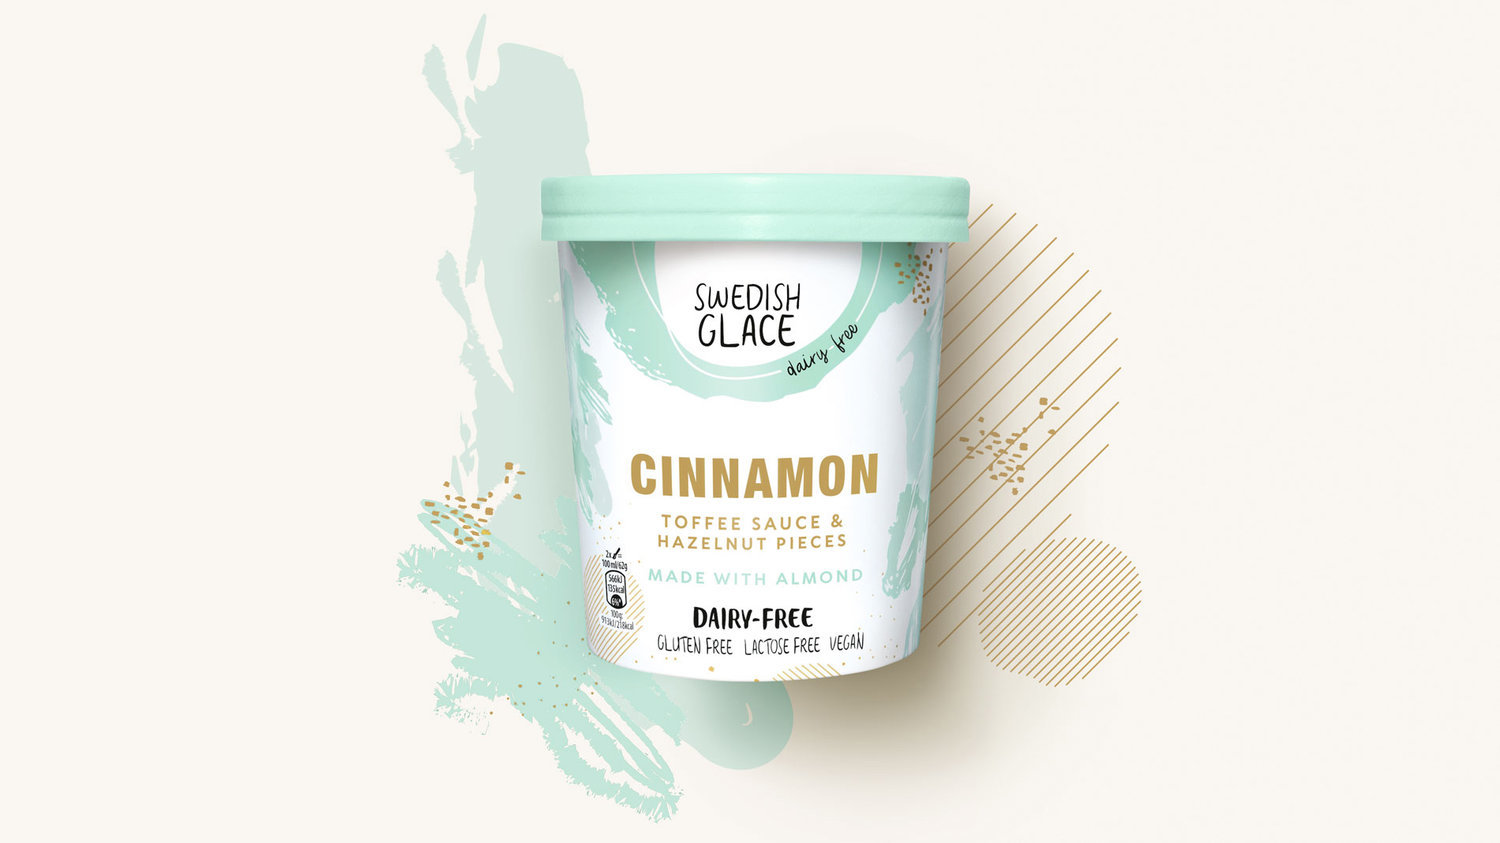 Packaging Design for the Vegan Ice Cream Swedish Glace